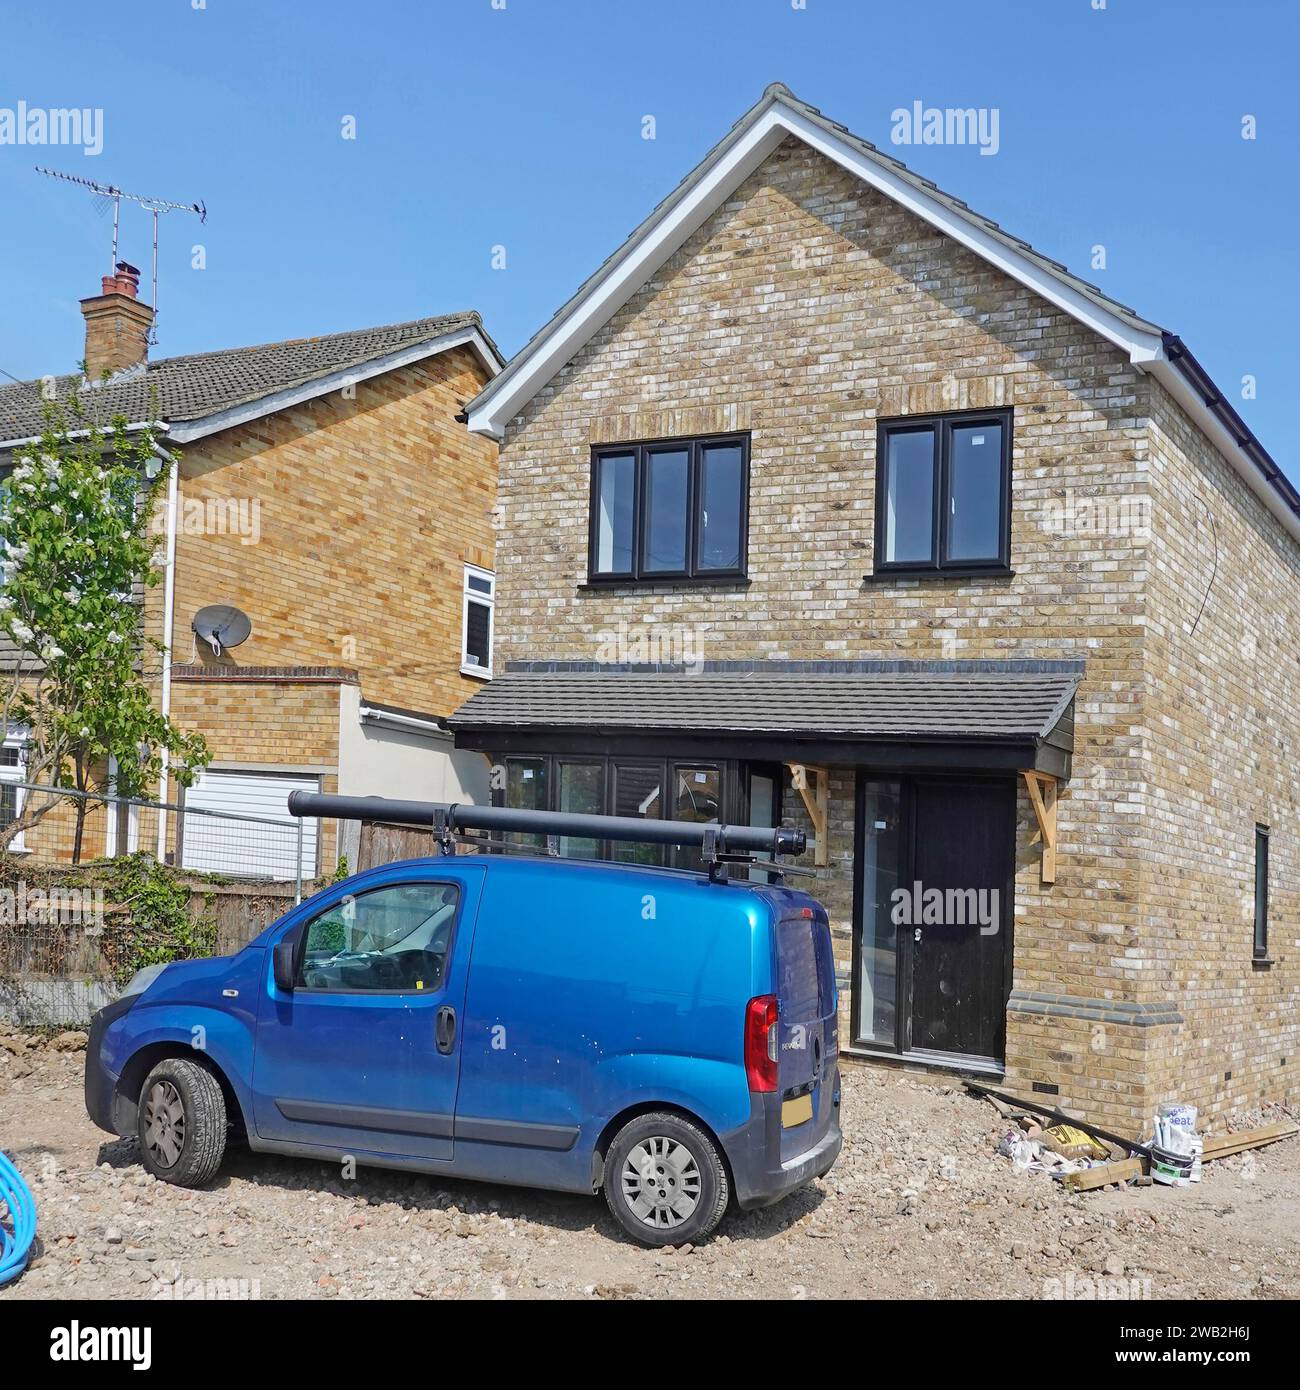 Alamy series 41 stages of work in progress pics detached house on infill plot from start to near complete blue van plumbers working indoors England UK Stock Photo